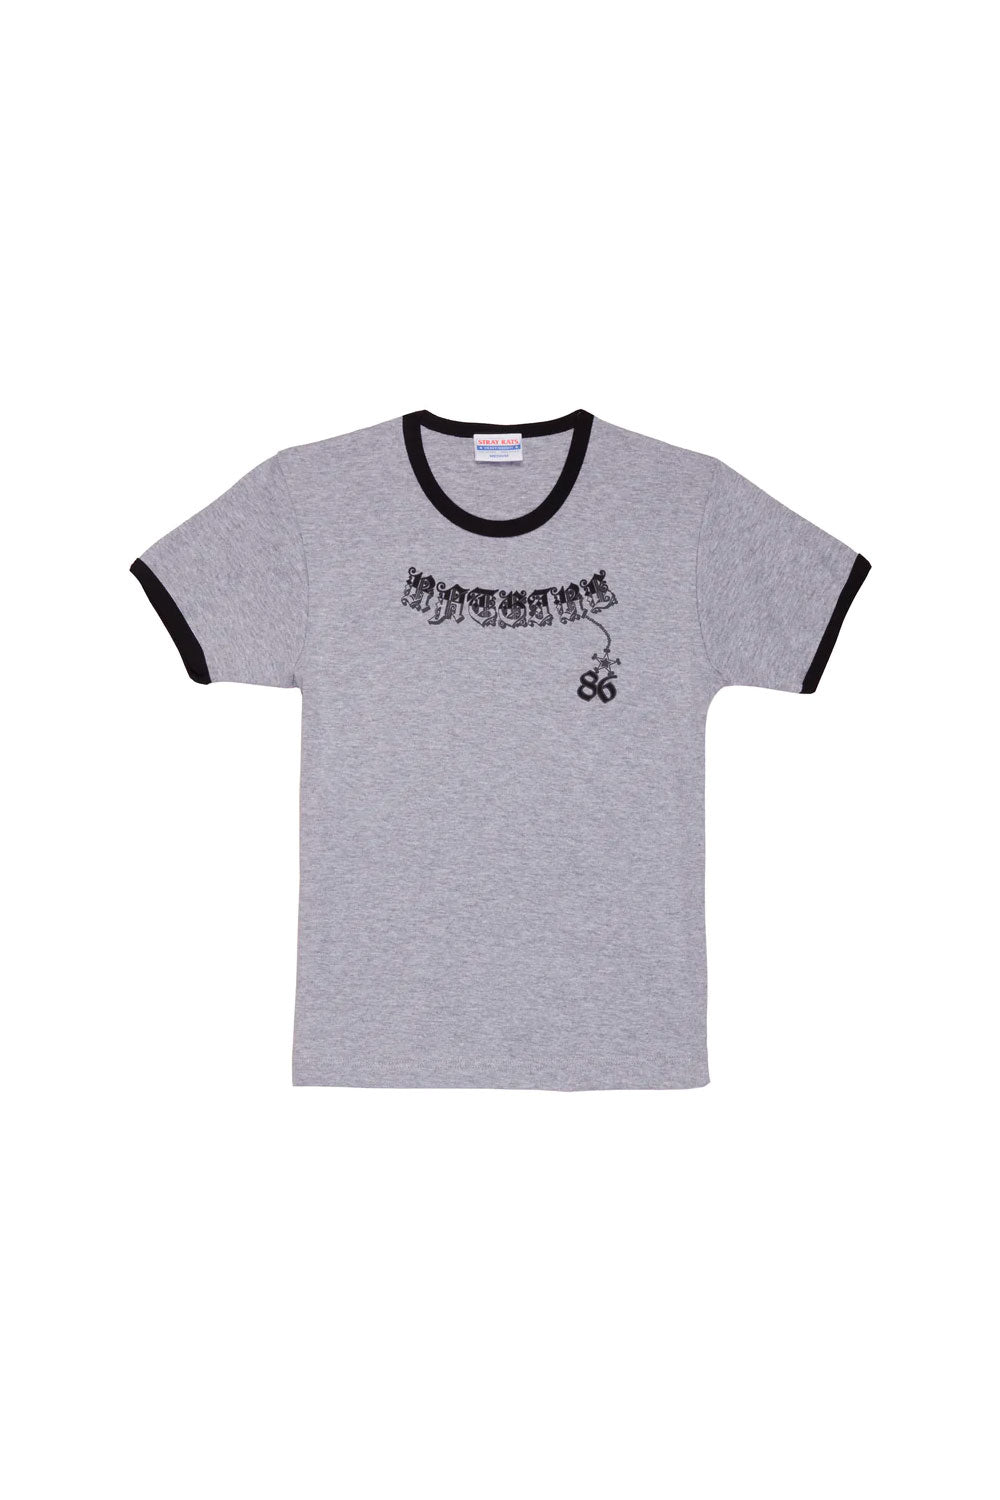 The STRAY RATS -  86 BABY TEE GREY available online with global shipping, and in PAM Stores Melbourne and Sydney.